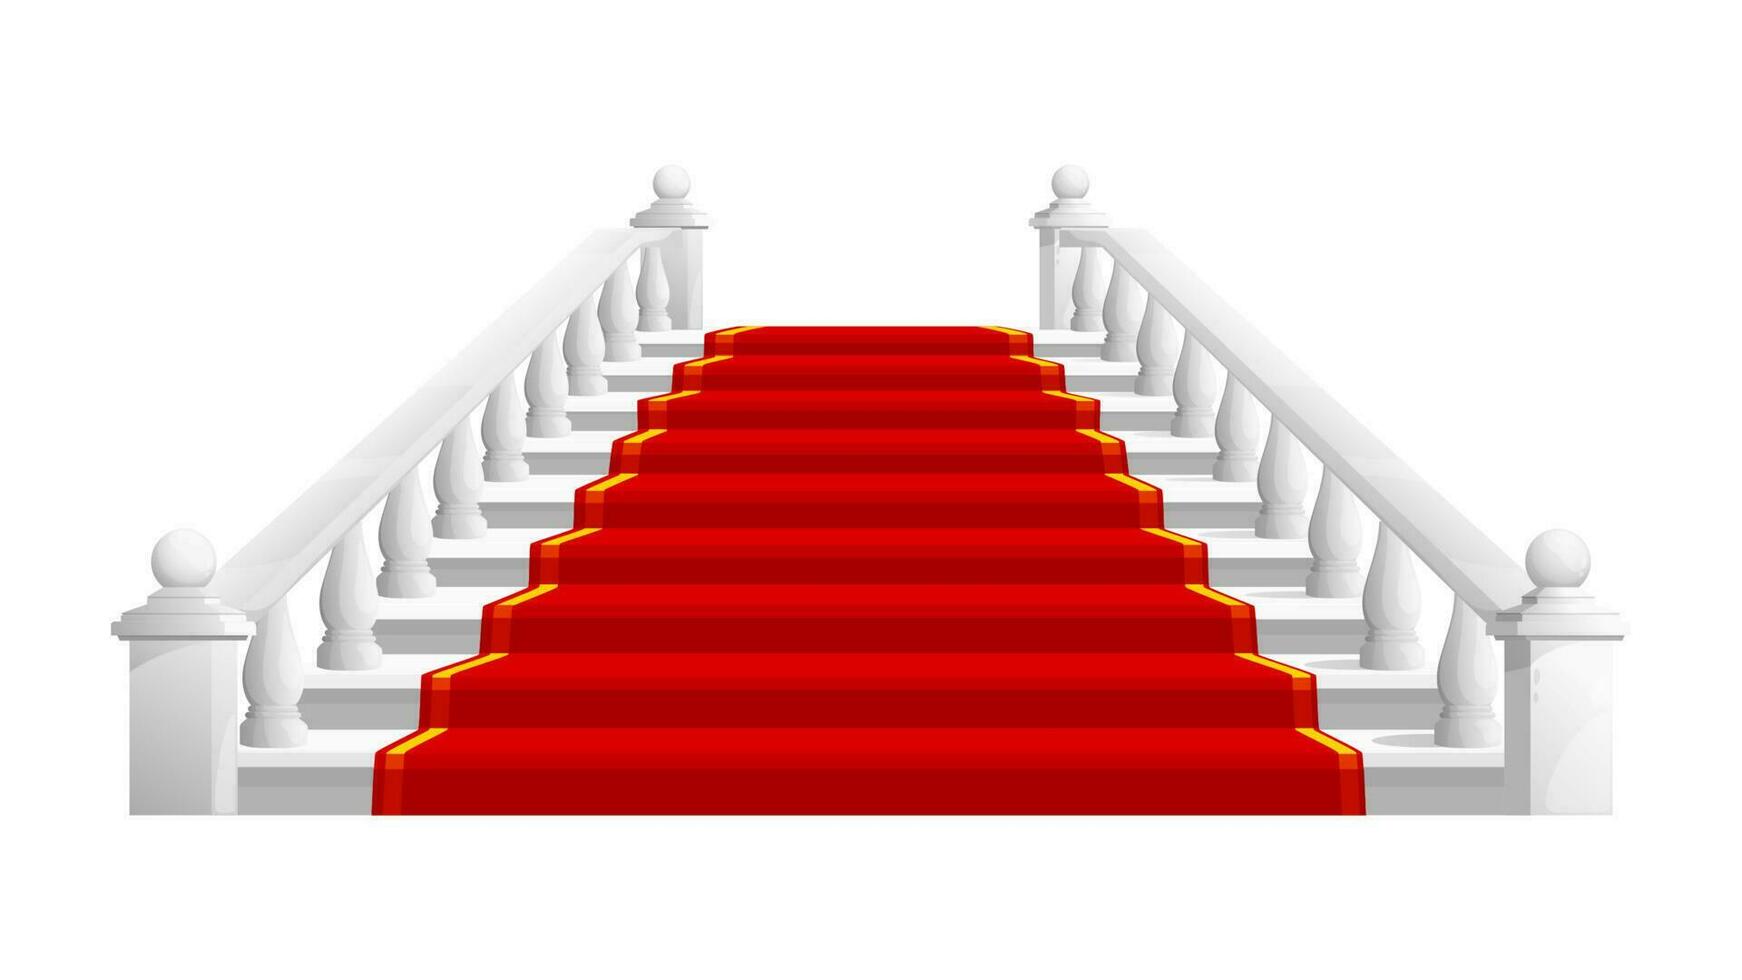 Castle astaircase, marble stairs with red carpet vector